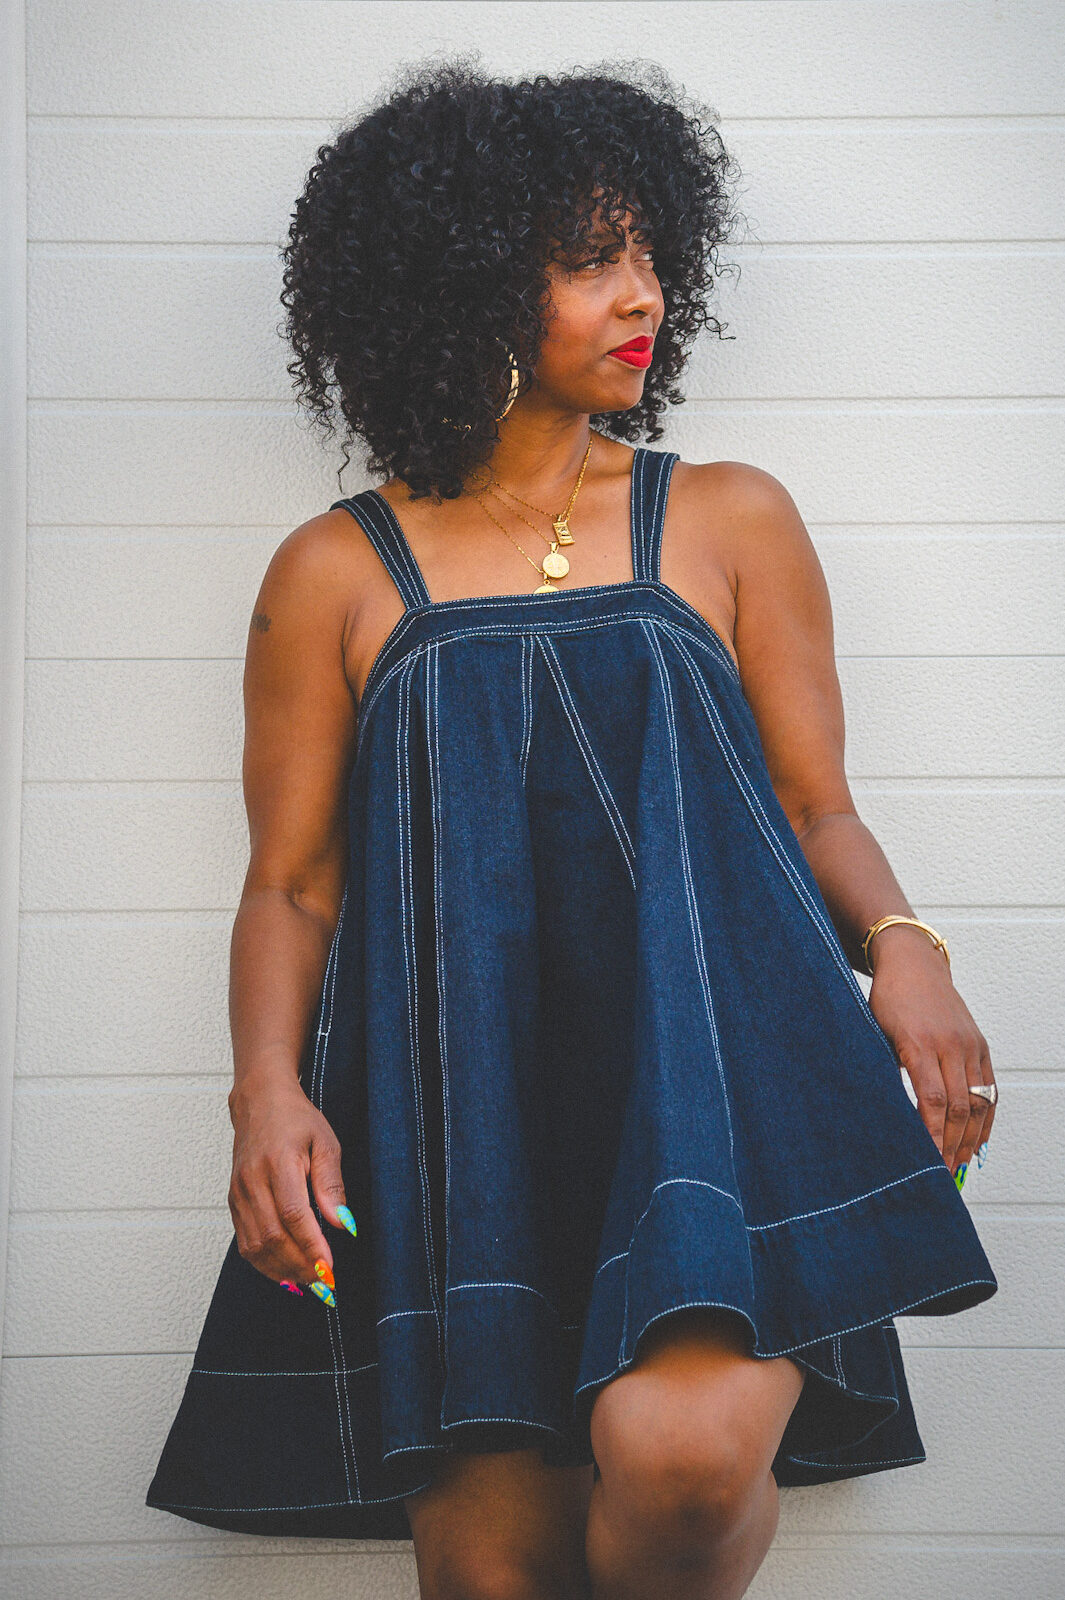 RELAXING WEEKEND OUTFIT IDEAS, SWEENEE STYLE, HOW TO DRESS FOR SUMMER, SUMMER OUTFIT IDEA, HOW TO WEAR A DENIM DRESS, DENIM DRESSES, INDIANAPOLIS STYLE BLOG, INDIANA FASHION BLOGGER